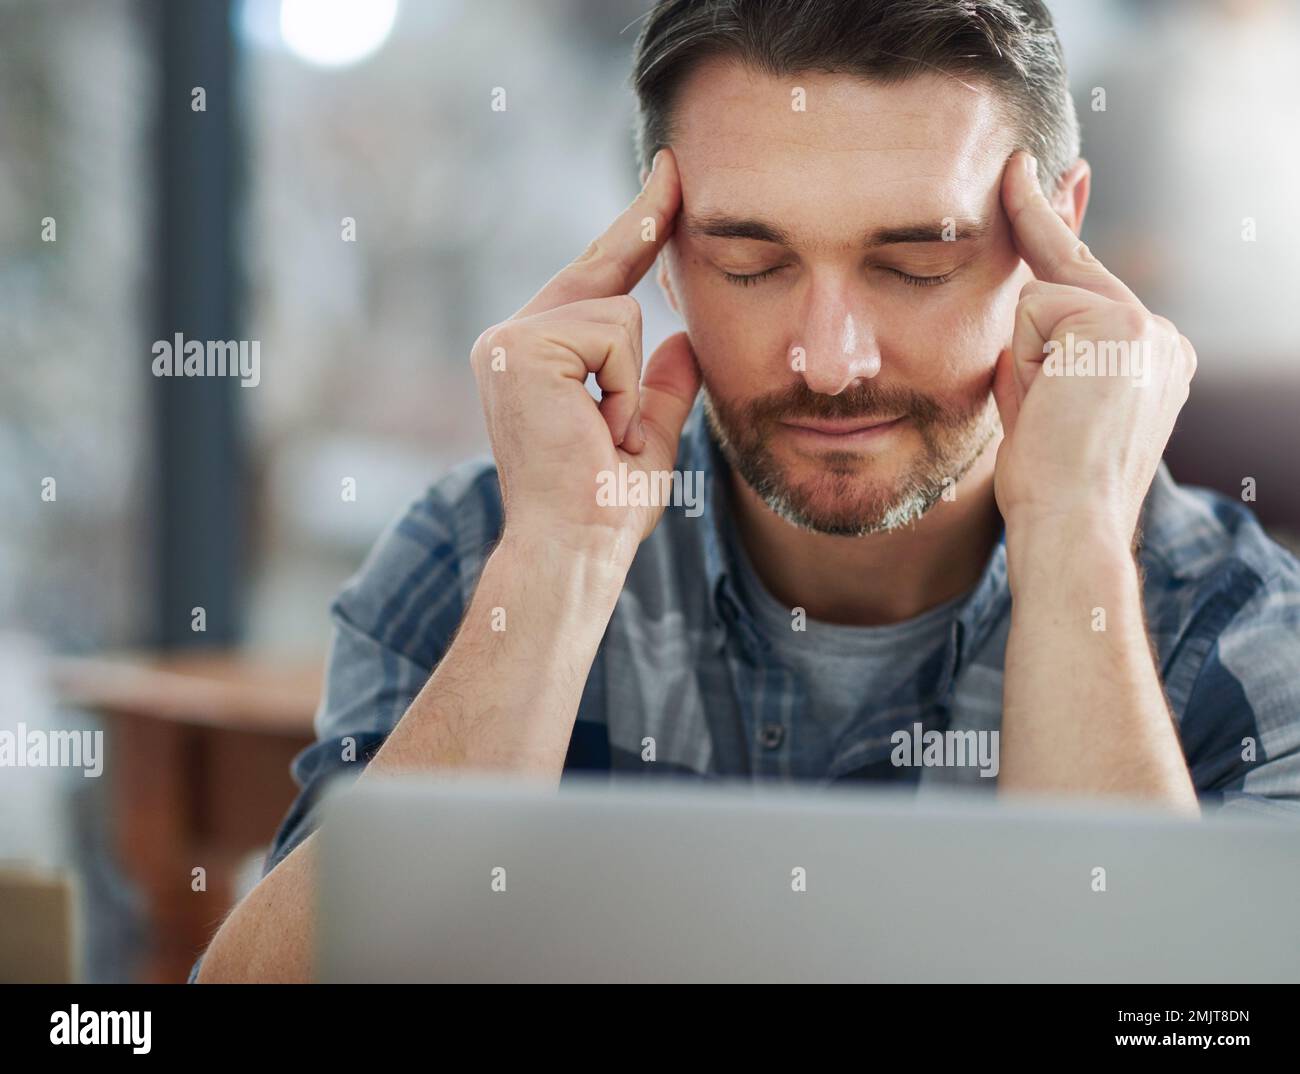 This day has turned into one big headache. a mature businessman looking stressed out at his office desk. Stock Photo